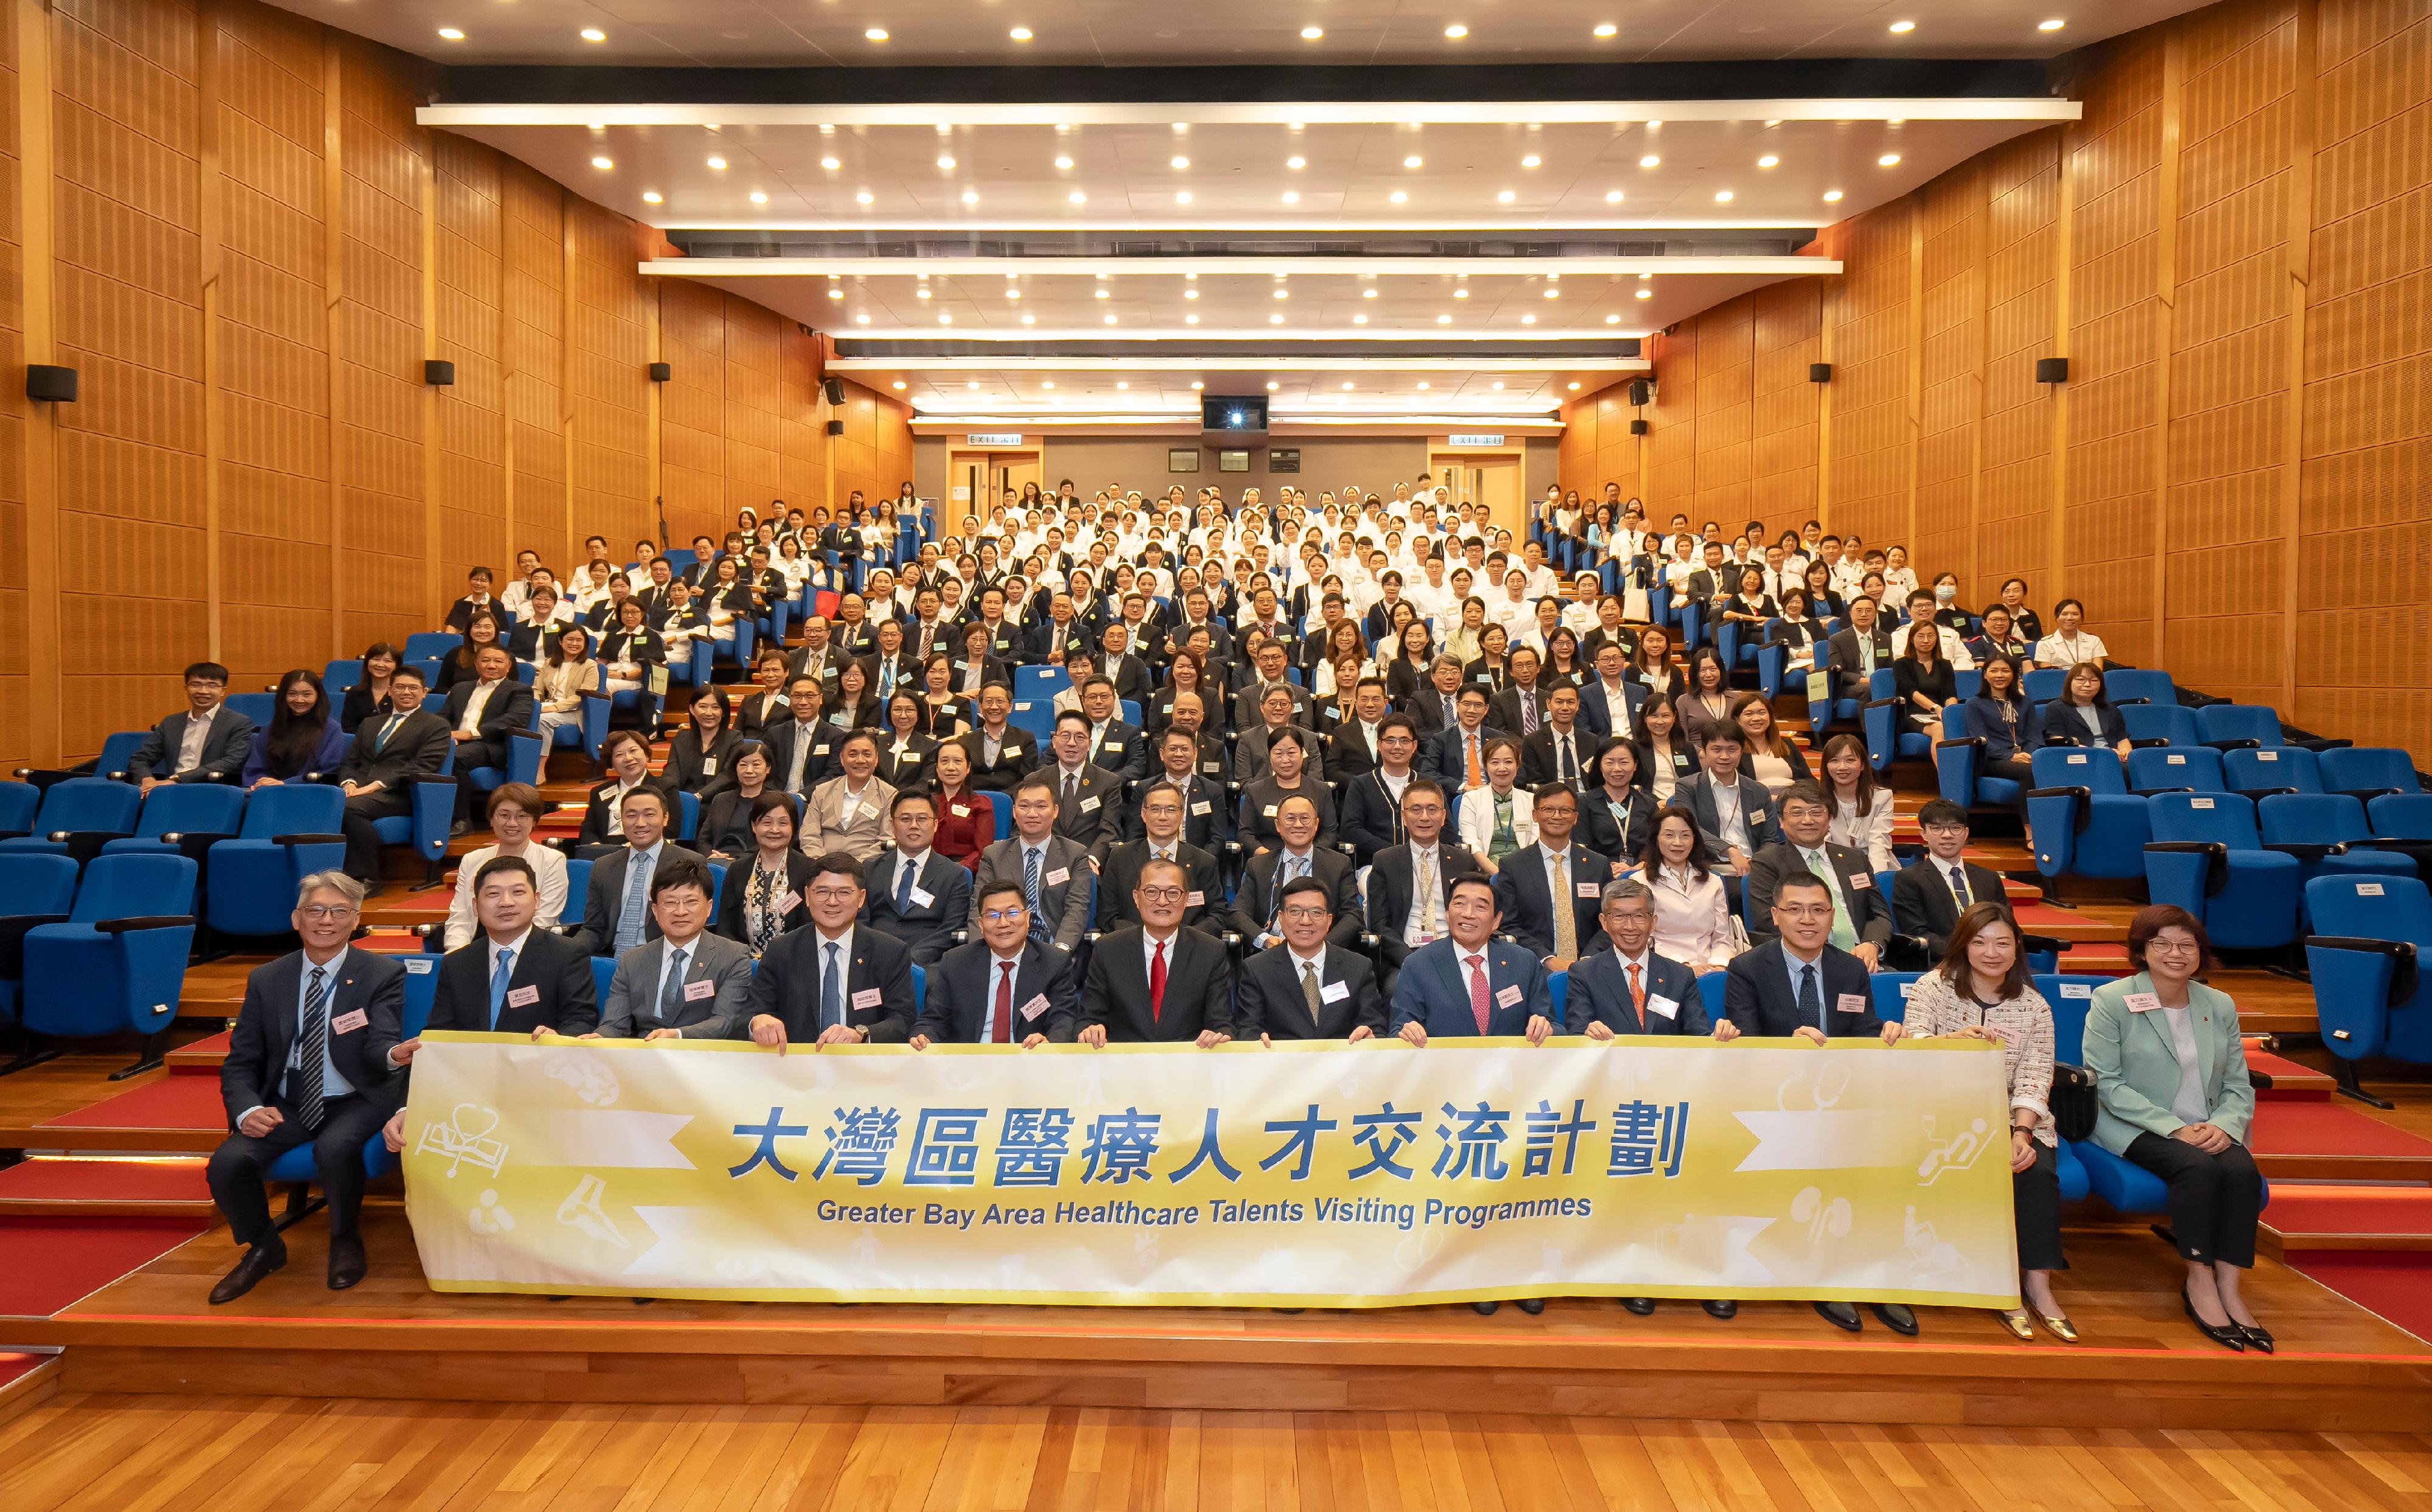 The Hospital Authority (HA) today (April 29) hosted a welcome ceremony to greet more than 100 Guangdong healthcare professionals, who came to Hong Kong for the Greater Bay Area Healthcare Talents Visiting Programmes. Photo shows The Secretary for Health, Professor Lo Chung-mau (Front row sixth left), Deputy Director-General of the Health Commission of Guangdong Province, Mr Deng Linfeng (Front row sixth right);Deputy Director-General of the Co-ordination Department of the Liaison Office of the Central People's Government in the Hong Kong Special Administrative Region, Mr Chen Zetao (Front row fifth left); the HA Chairman, Mr Henry Fan (Front row fifth right) and the HA Chief Executive, Dr Tony Ko (Front row forth left) attended the ceremony.

